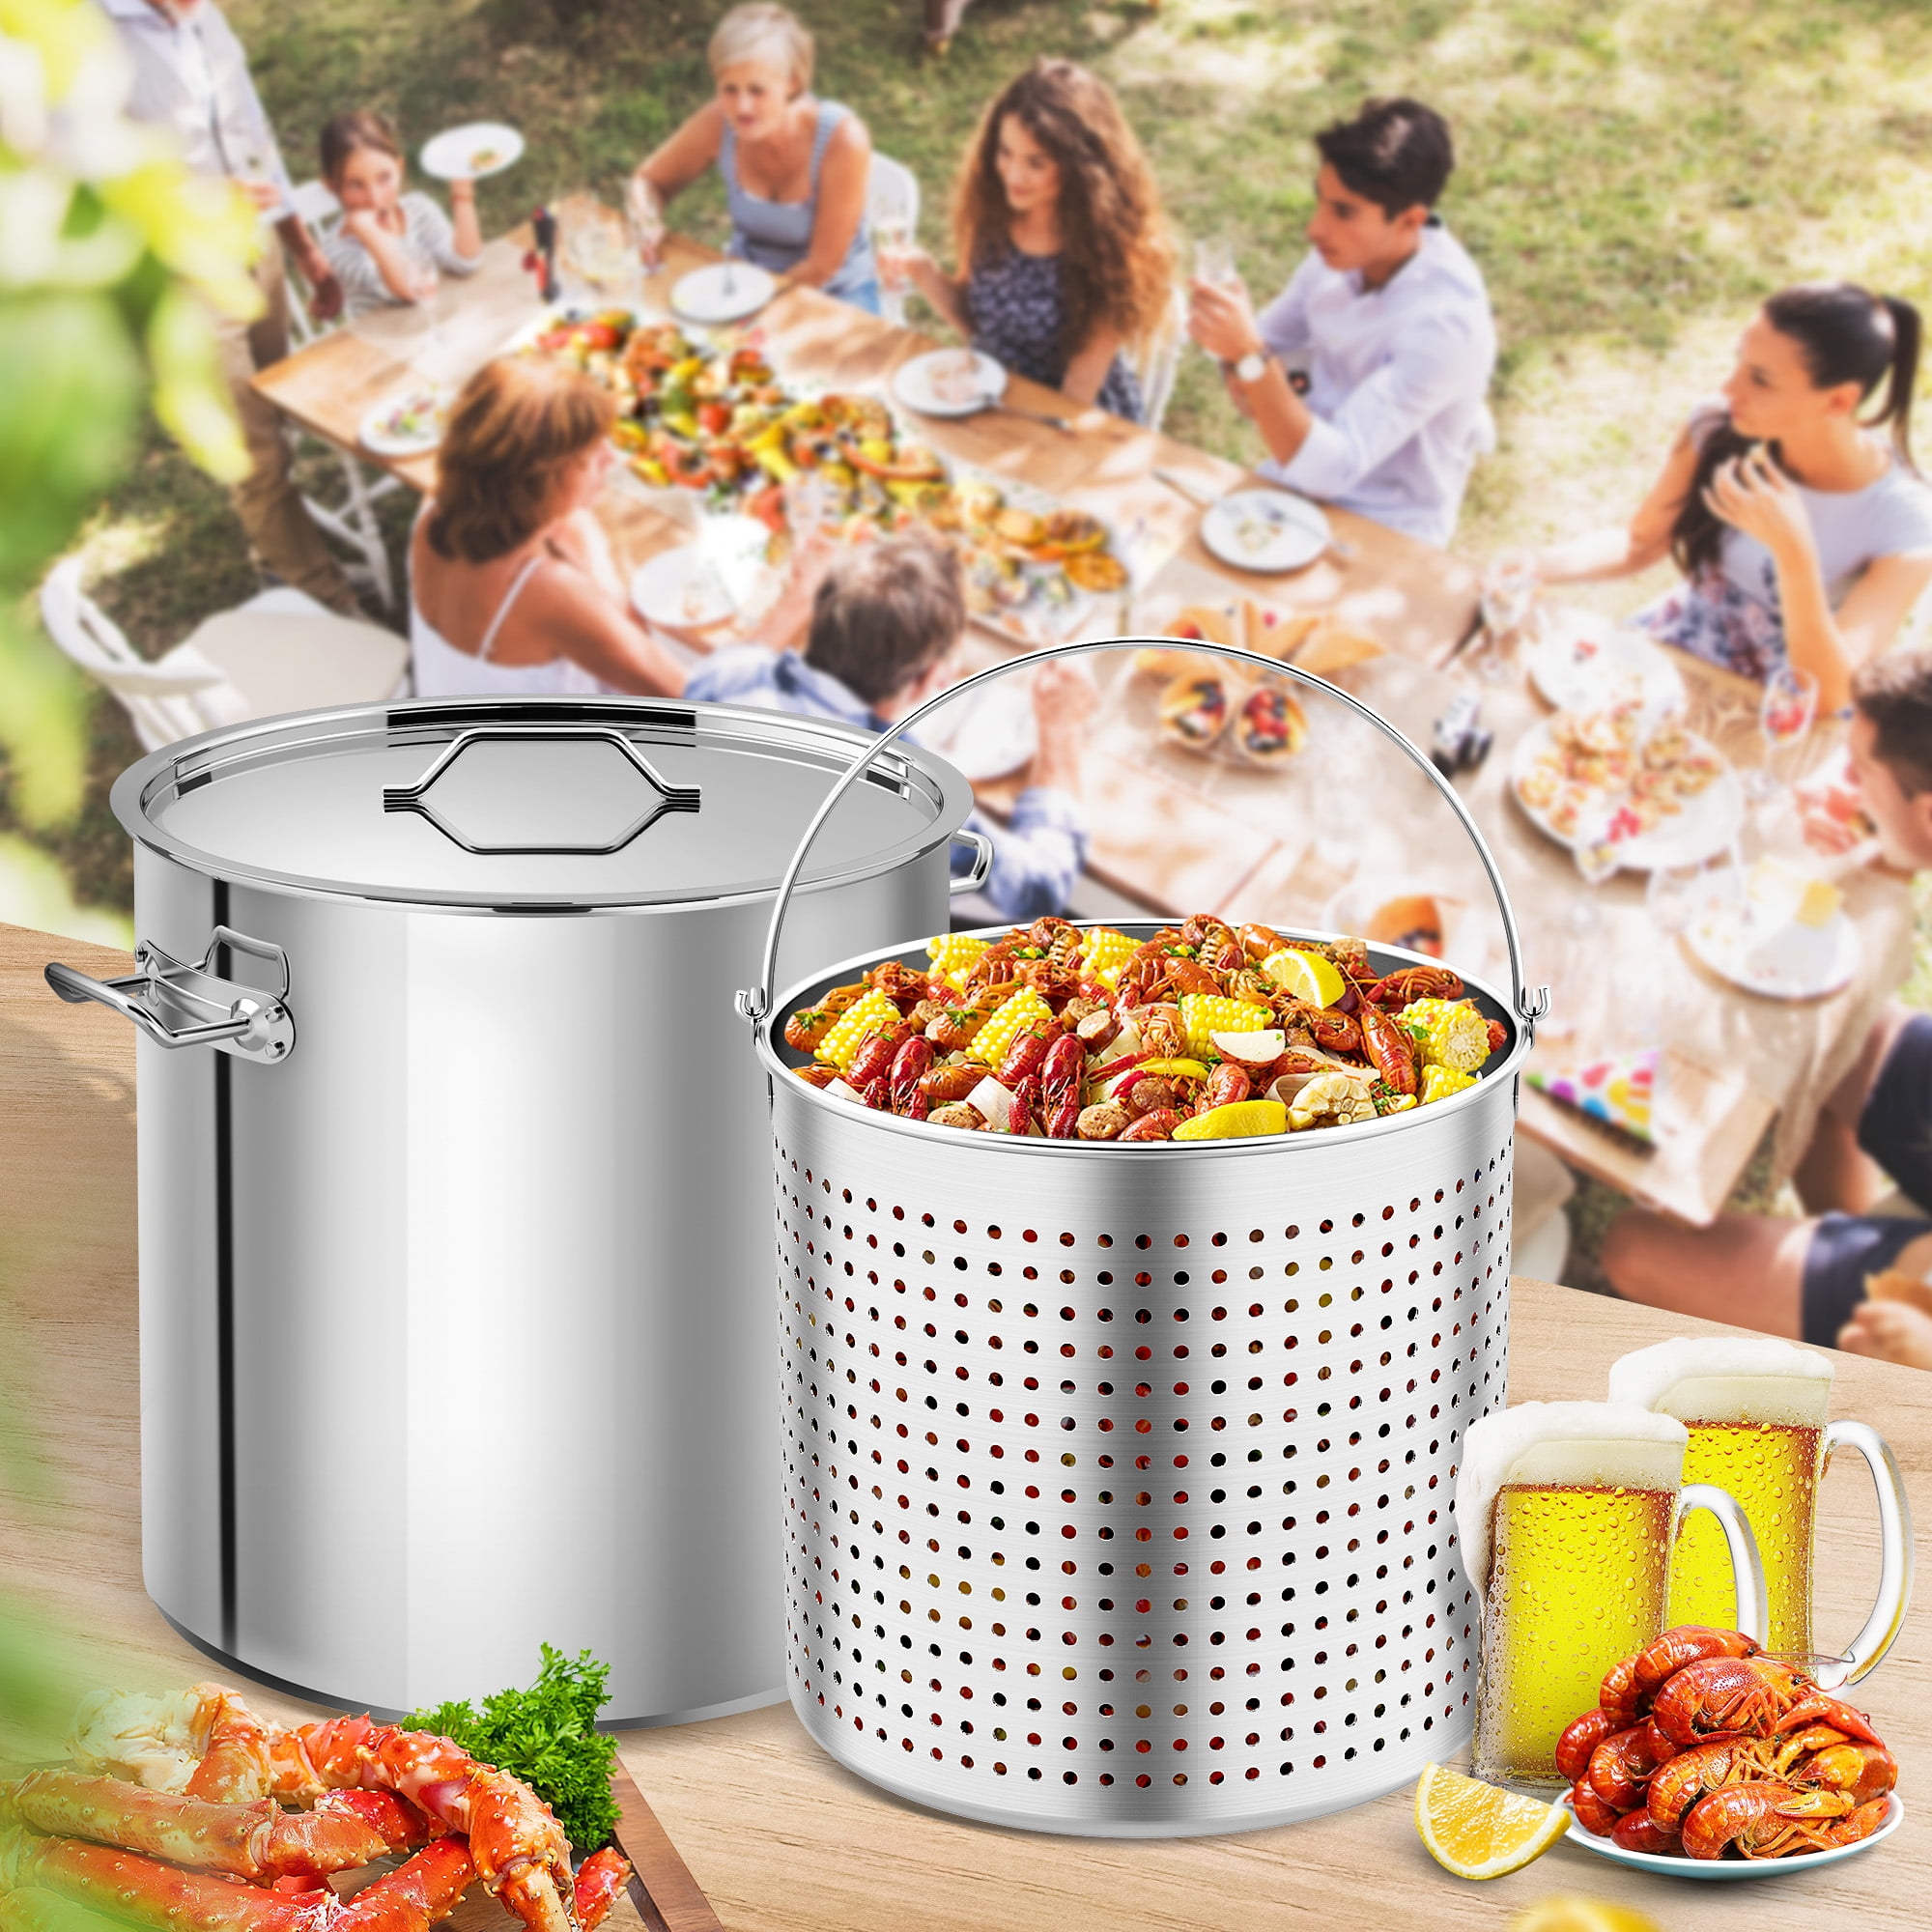 ARC 64-Quart Stainless Steel Seafood Boil Pot with Basket and Two Brown  Paper, Crawfish, Crab, Lobster, Shrimp Boil Stock Pot with Strainer, Turkey